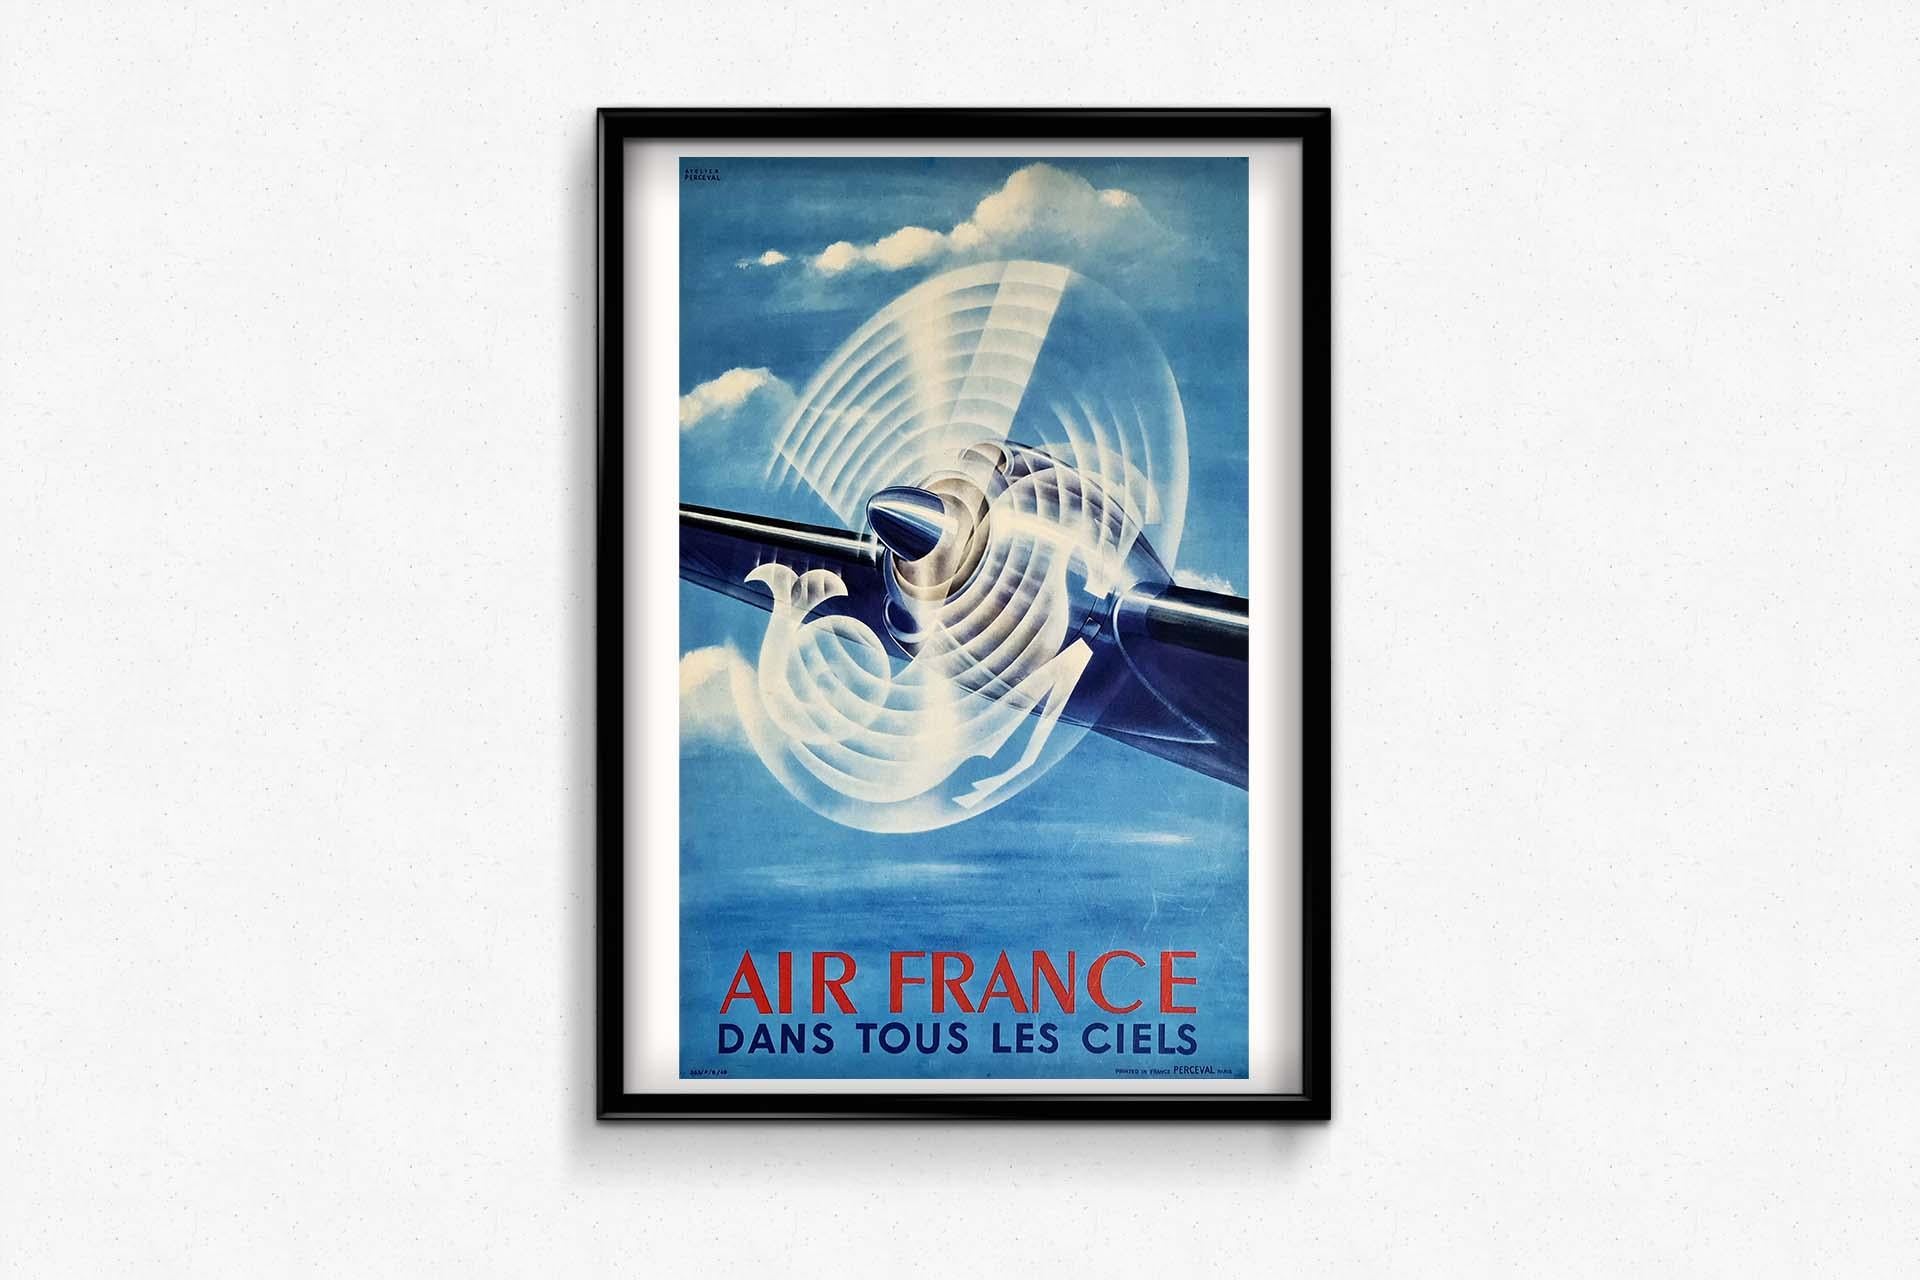 Beautiful poster created by the Perceval workshop in 1948, for the airline Air France.
The Air France logo is visible on the swirling propeller in the sky.